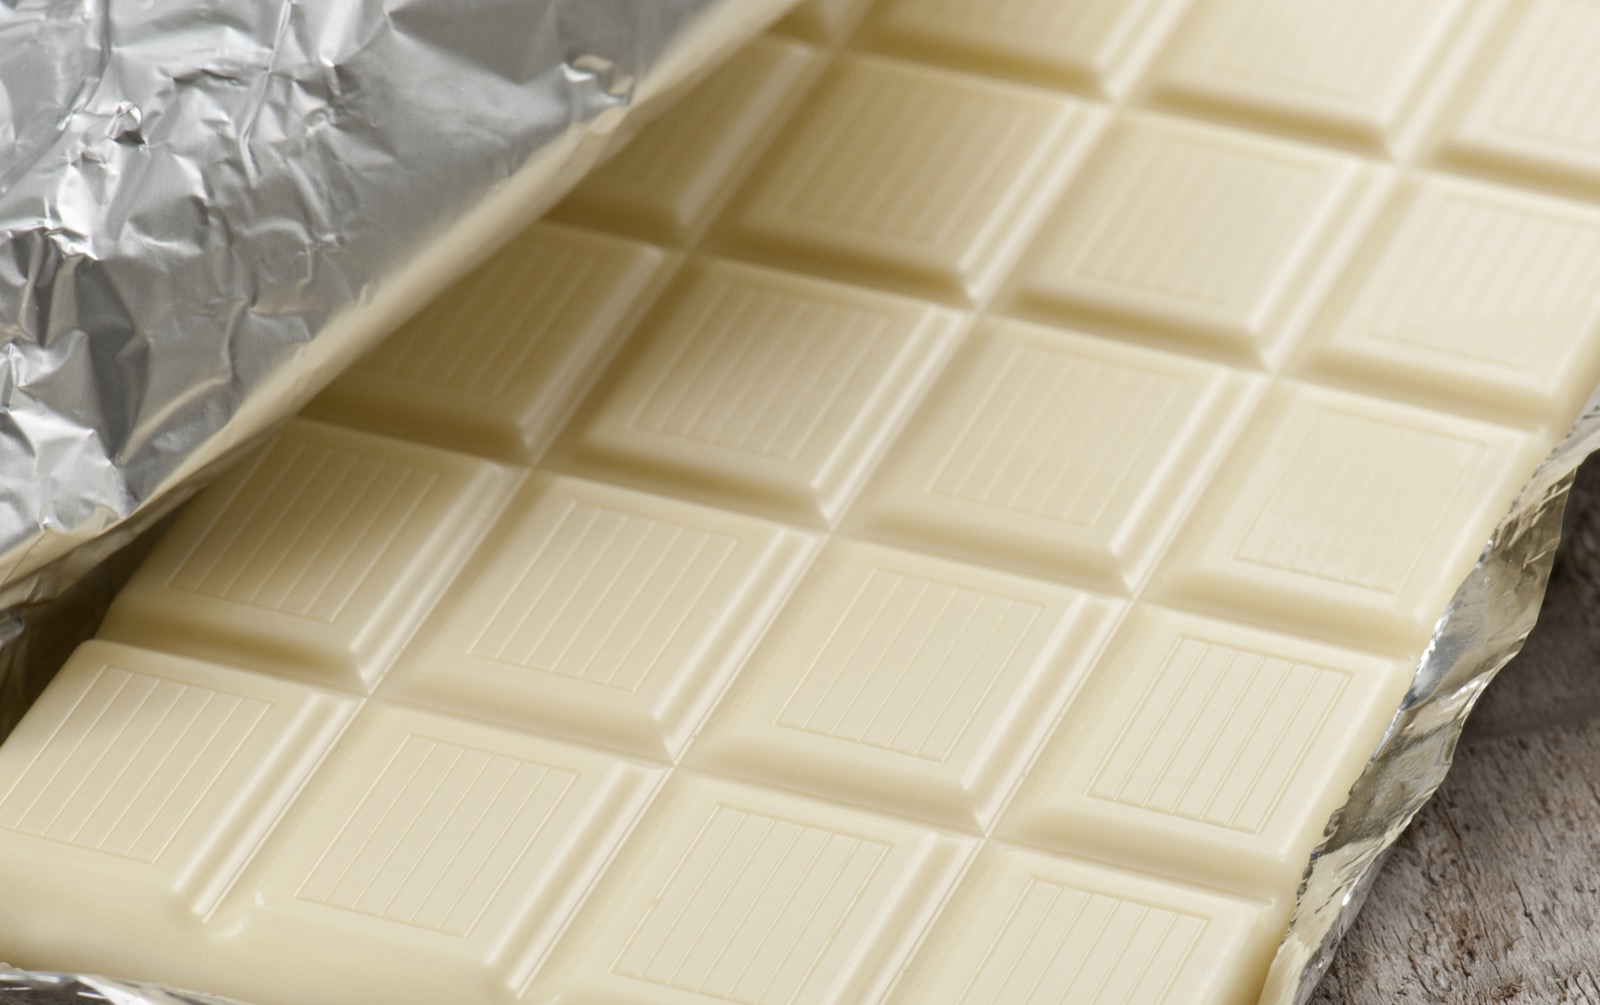 We’ll Guess What 🍁 Season You Were Born In, But You Have to Pick a Food in Every 🌈 Color First White chocolate bar